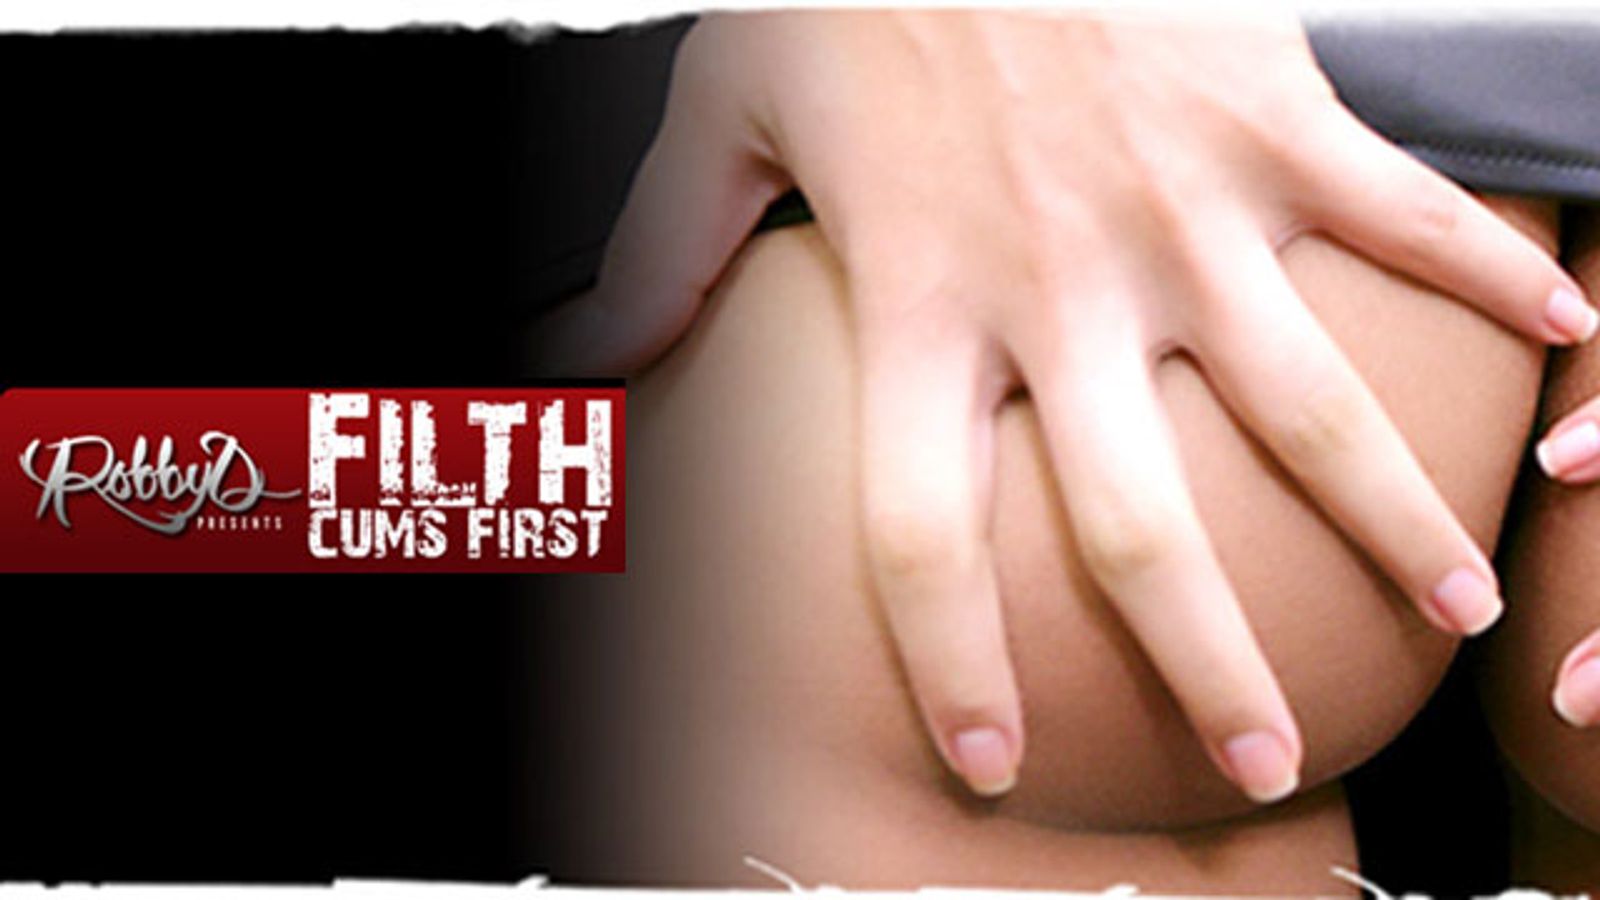 Robby D. Launches FilthCumsFirst.com